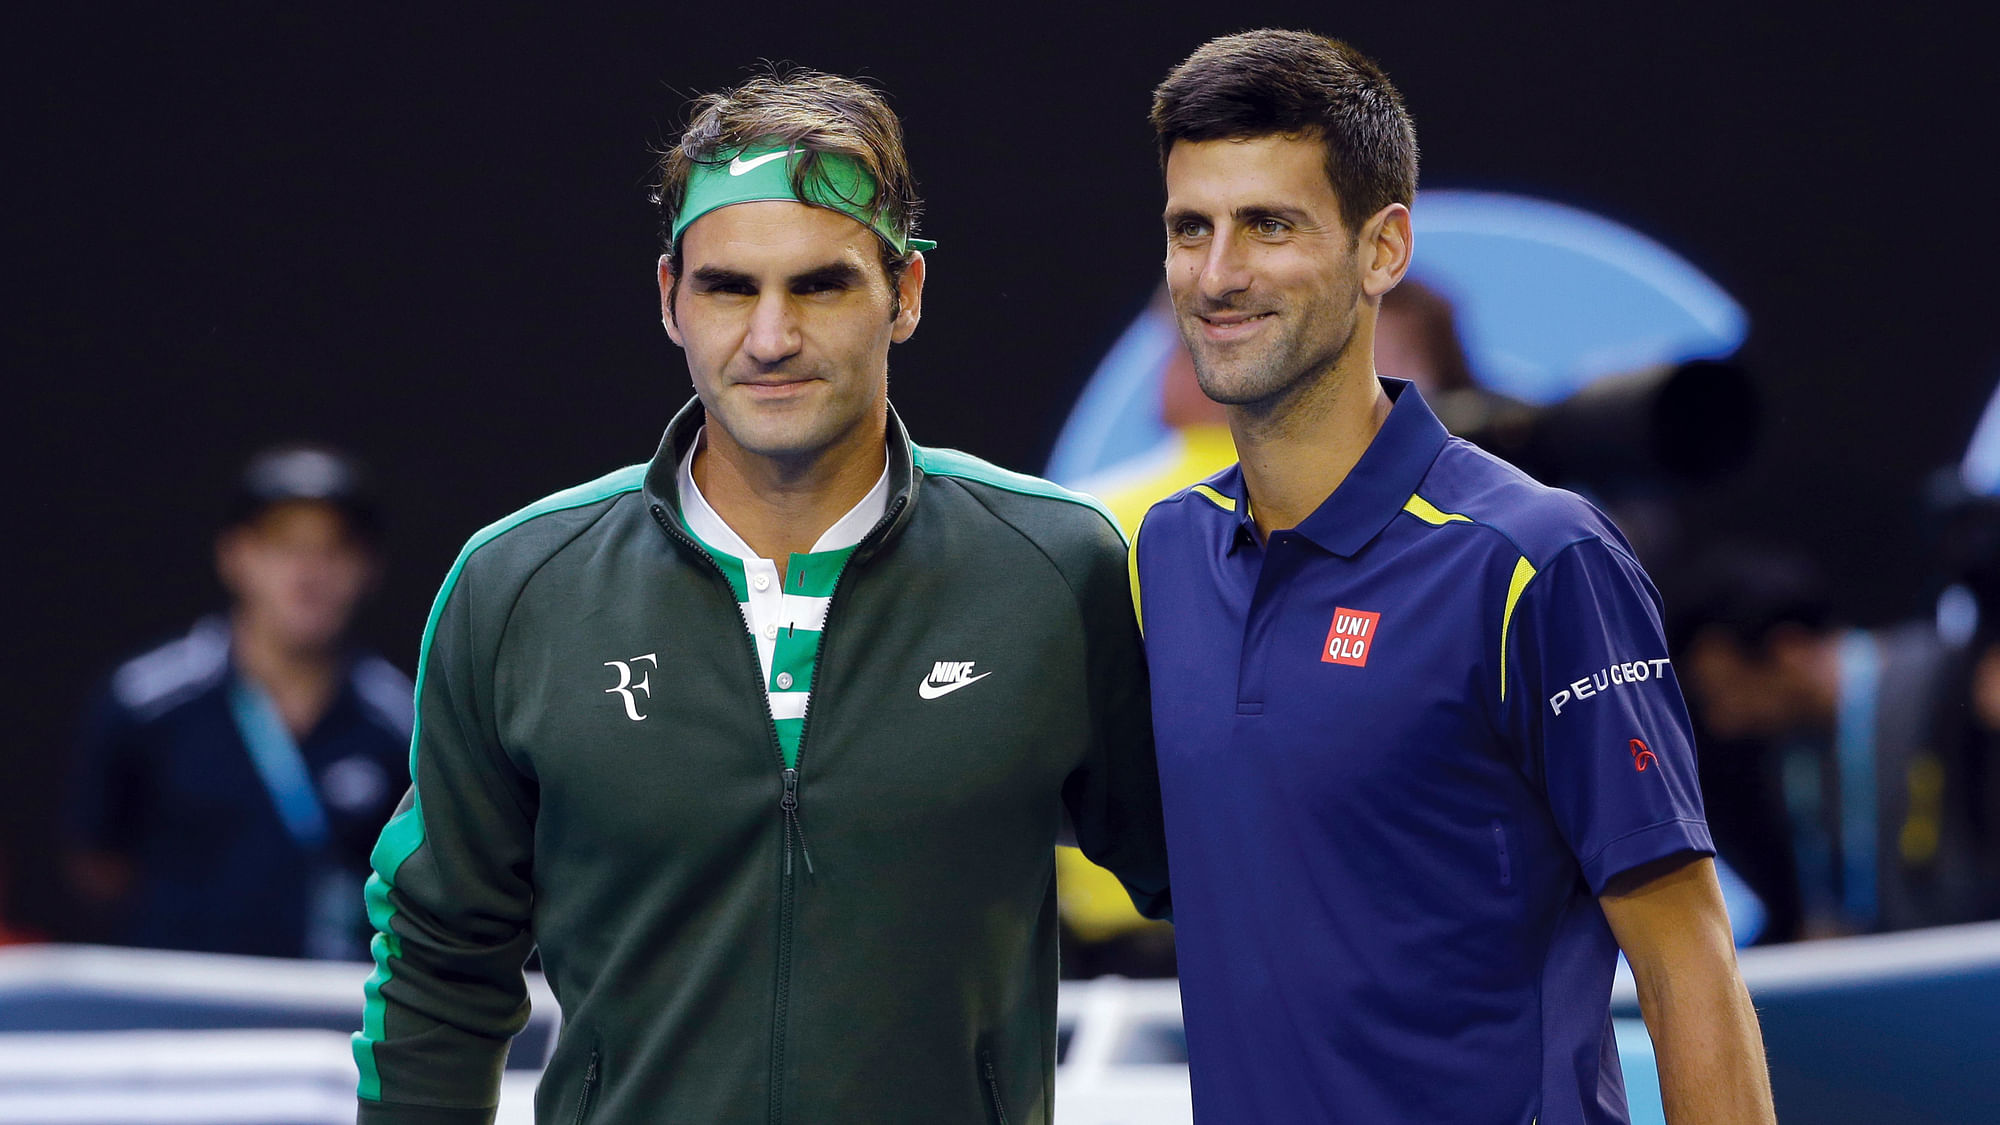 Roger Federer and Novak Djokovic will play on the same side of the net for the first time.